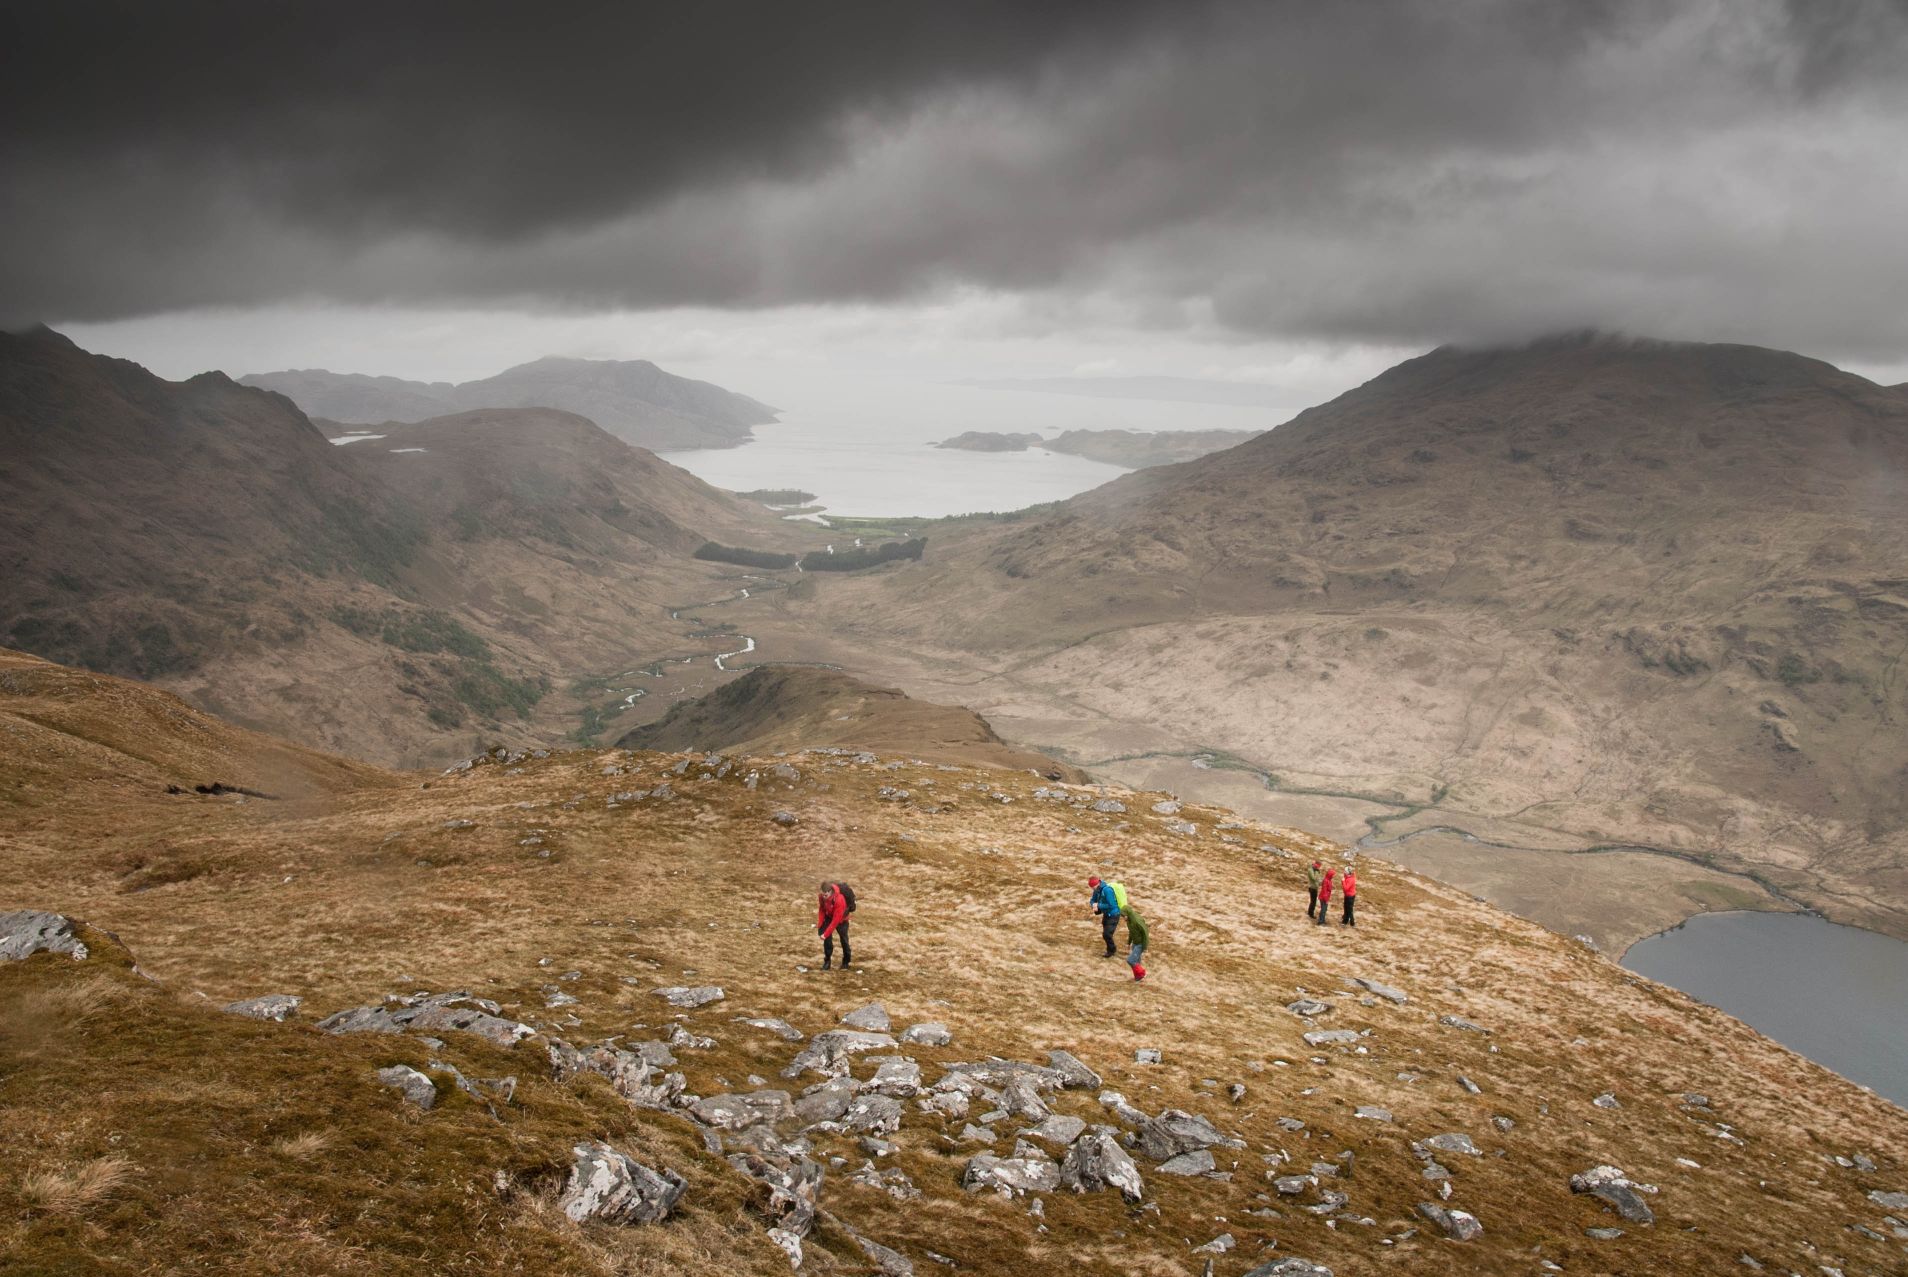 Hikers on Mount Inverie, Scotland.